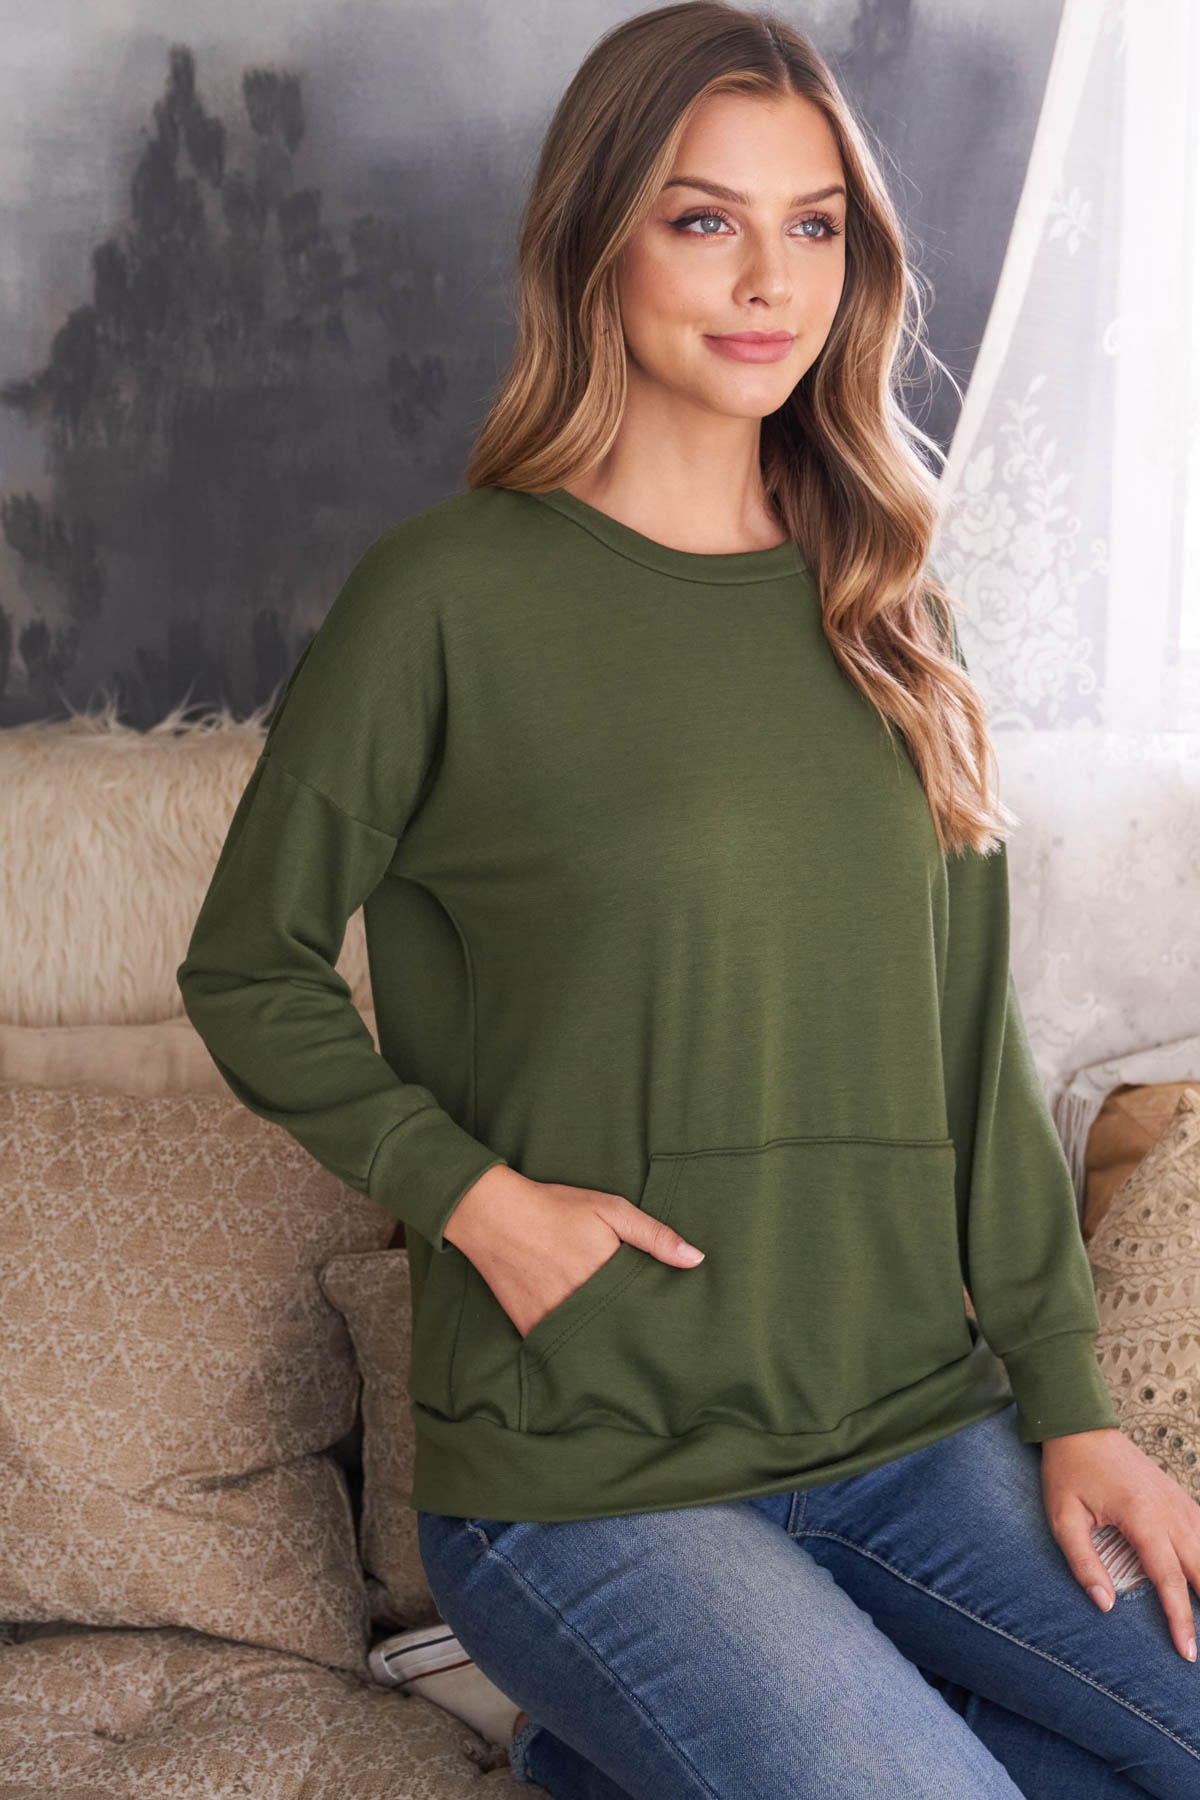 S10-12-2-PPT2063-OV - LONG SLEEVE FRENCH TERRY TOP WITH KANGAROO POCKET TOP- OLIVE 1-2-2-2 (NOW $8.75 ONLY!)